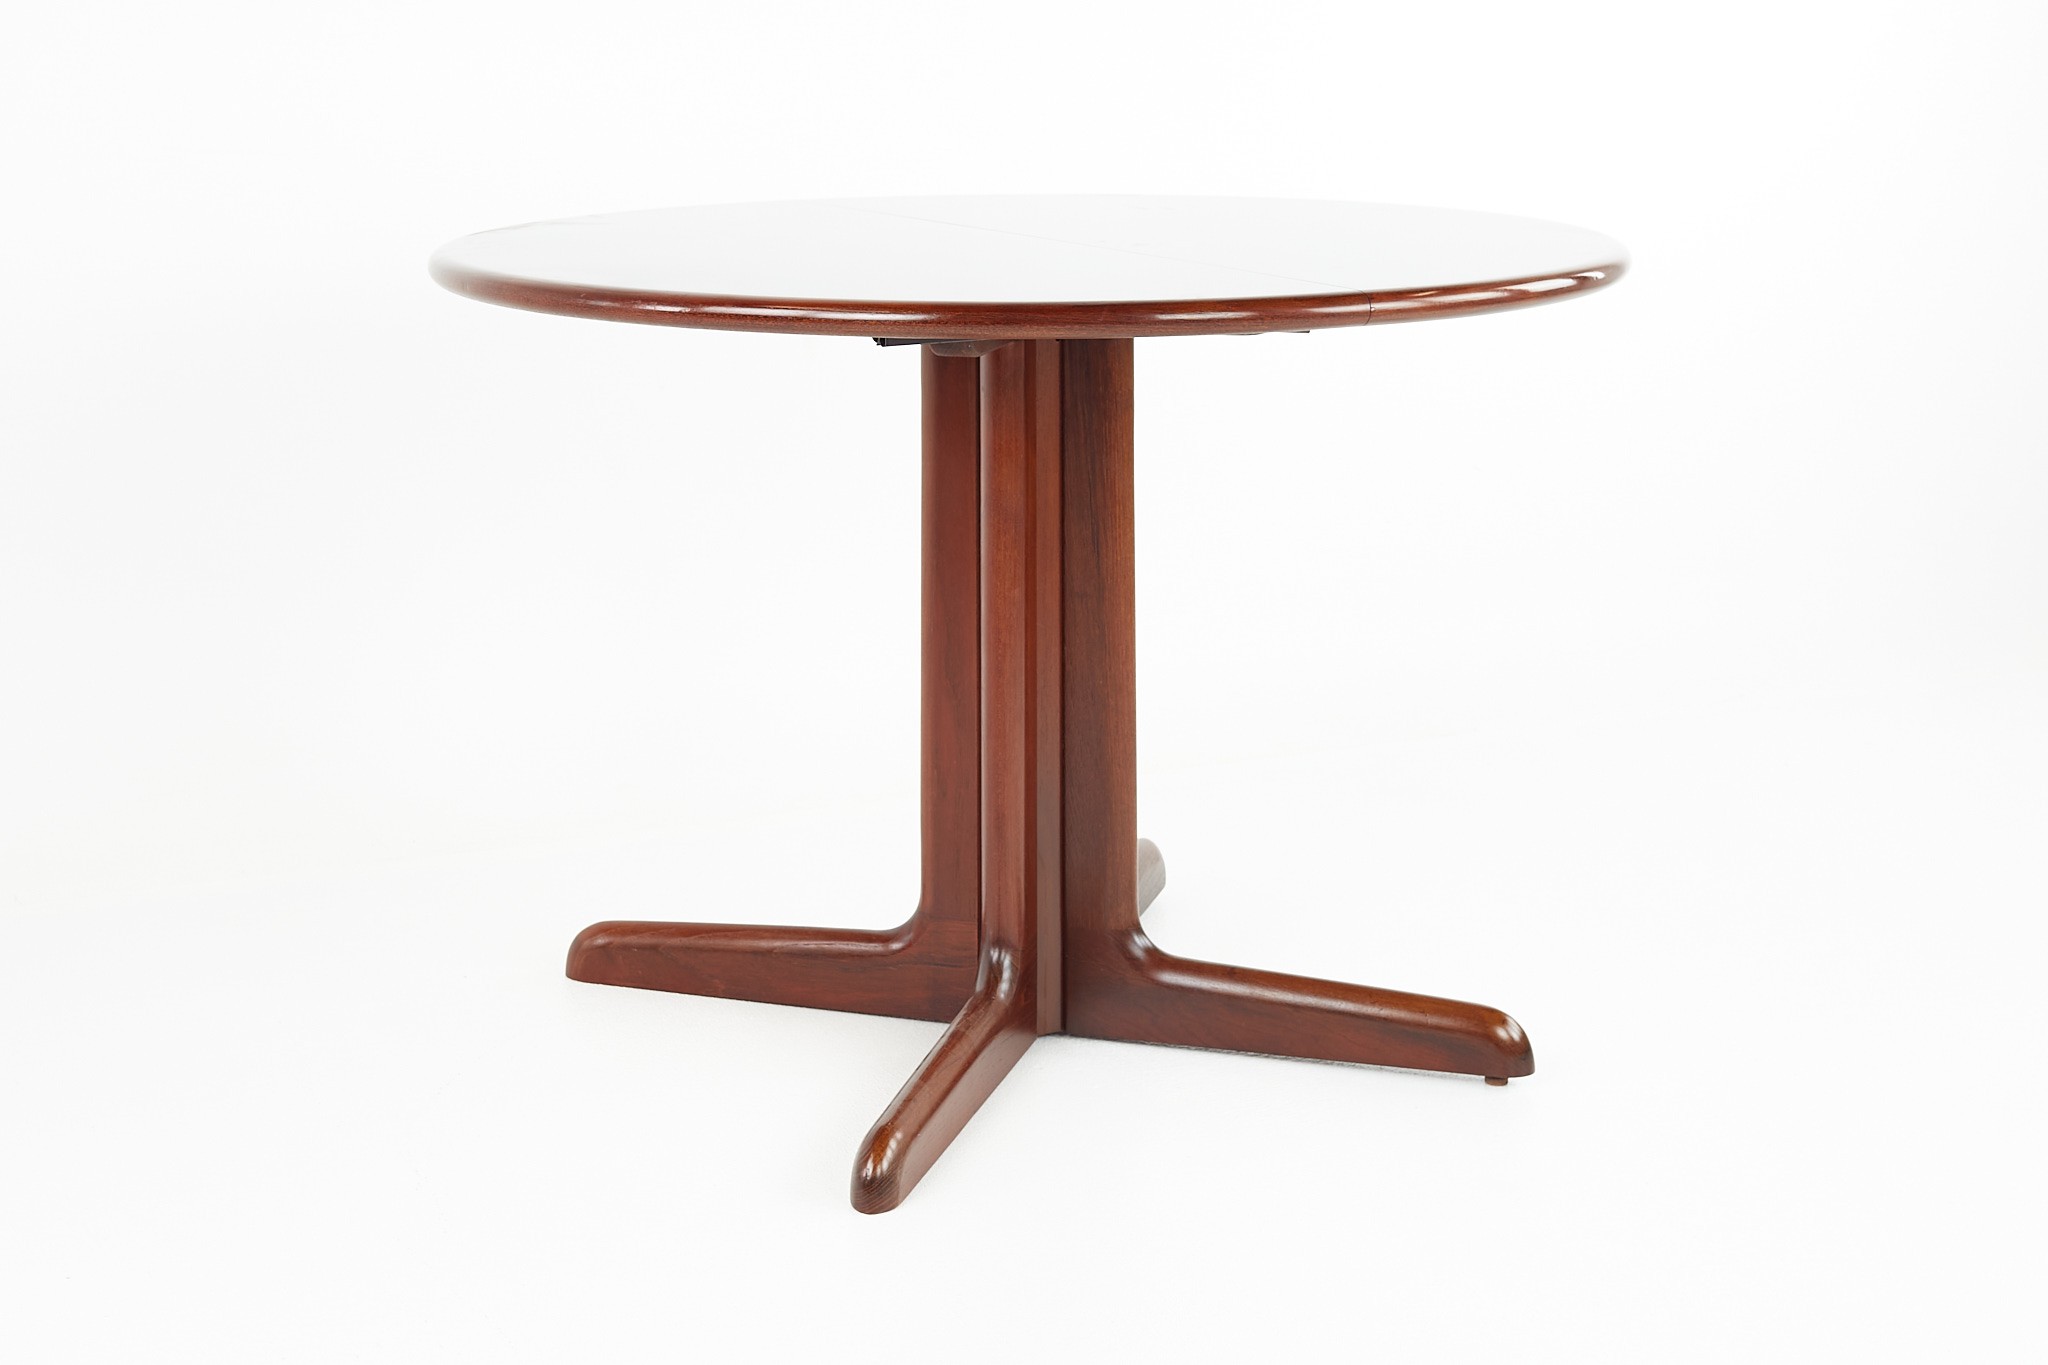 Gudme Mobelfabrik Mid Century Rosewood Dining Table with Leaf